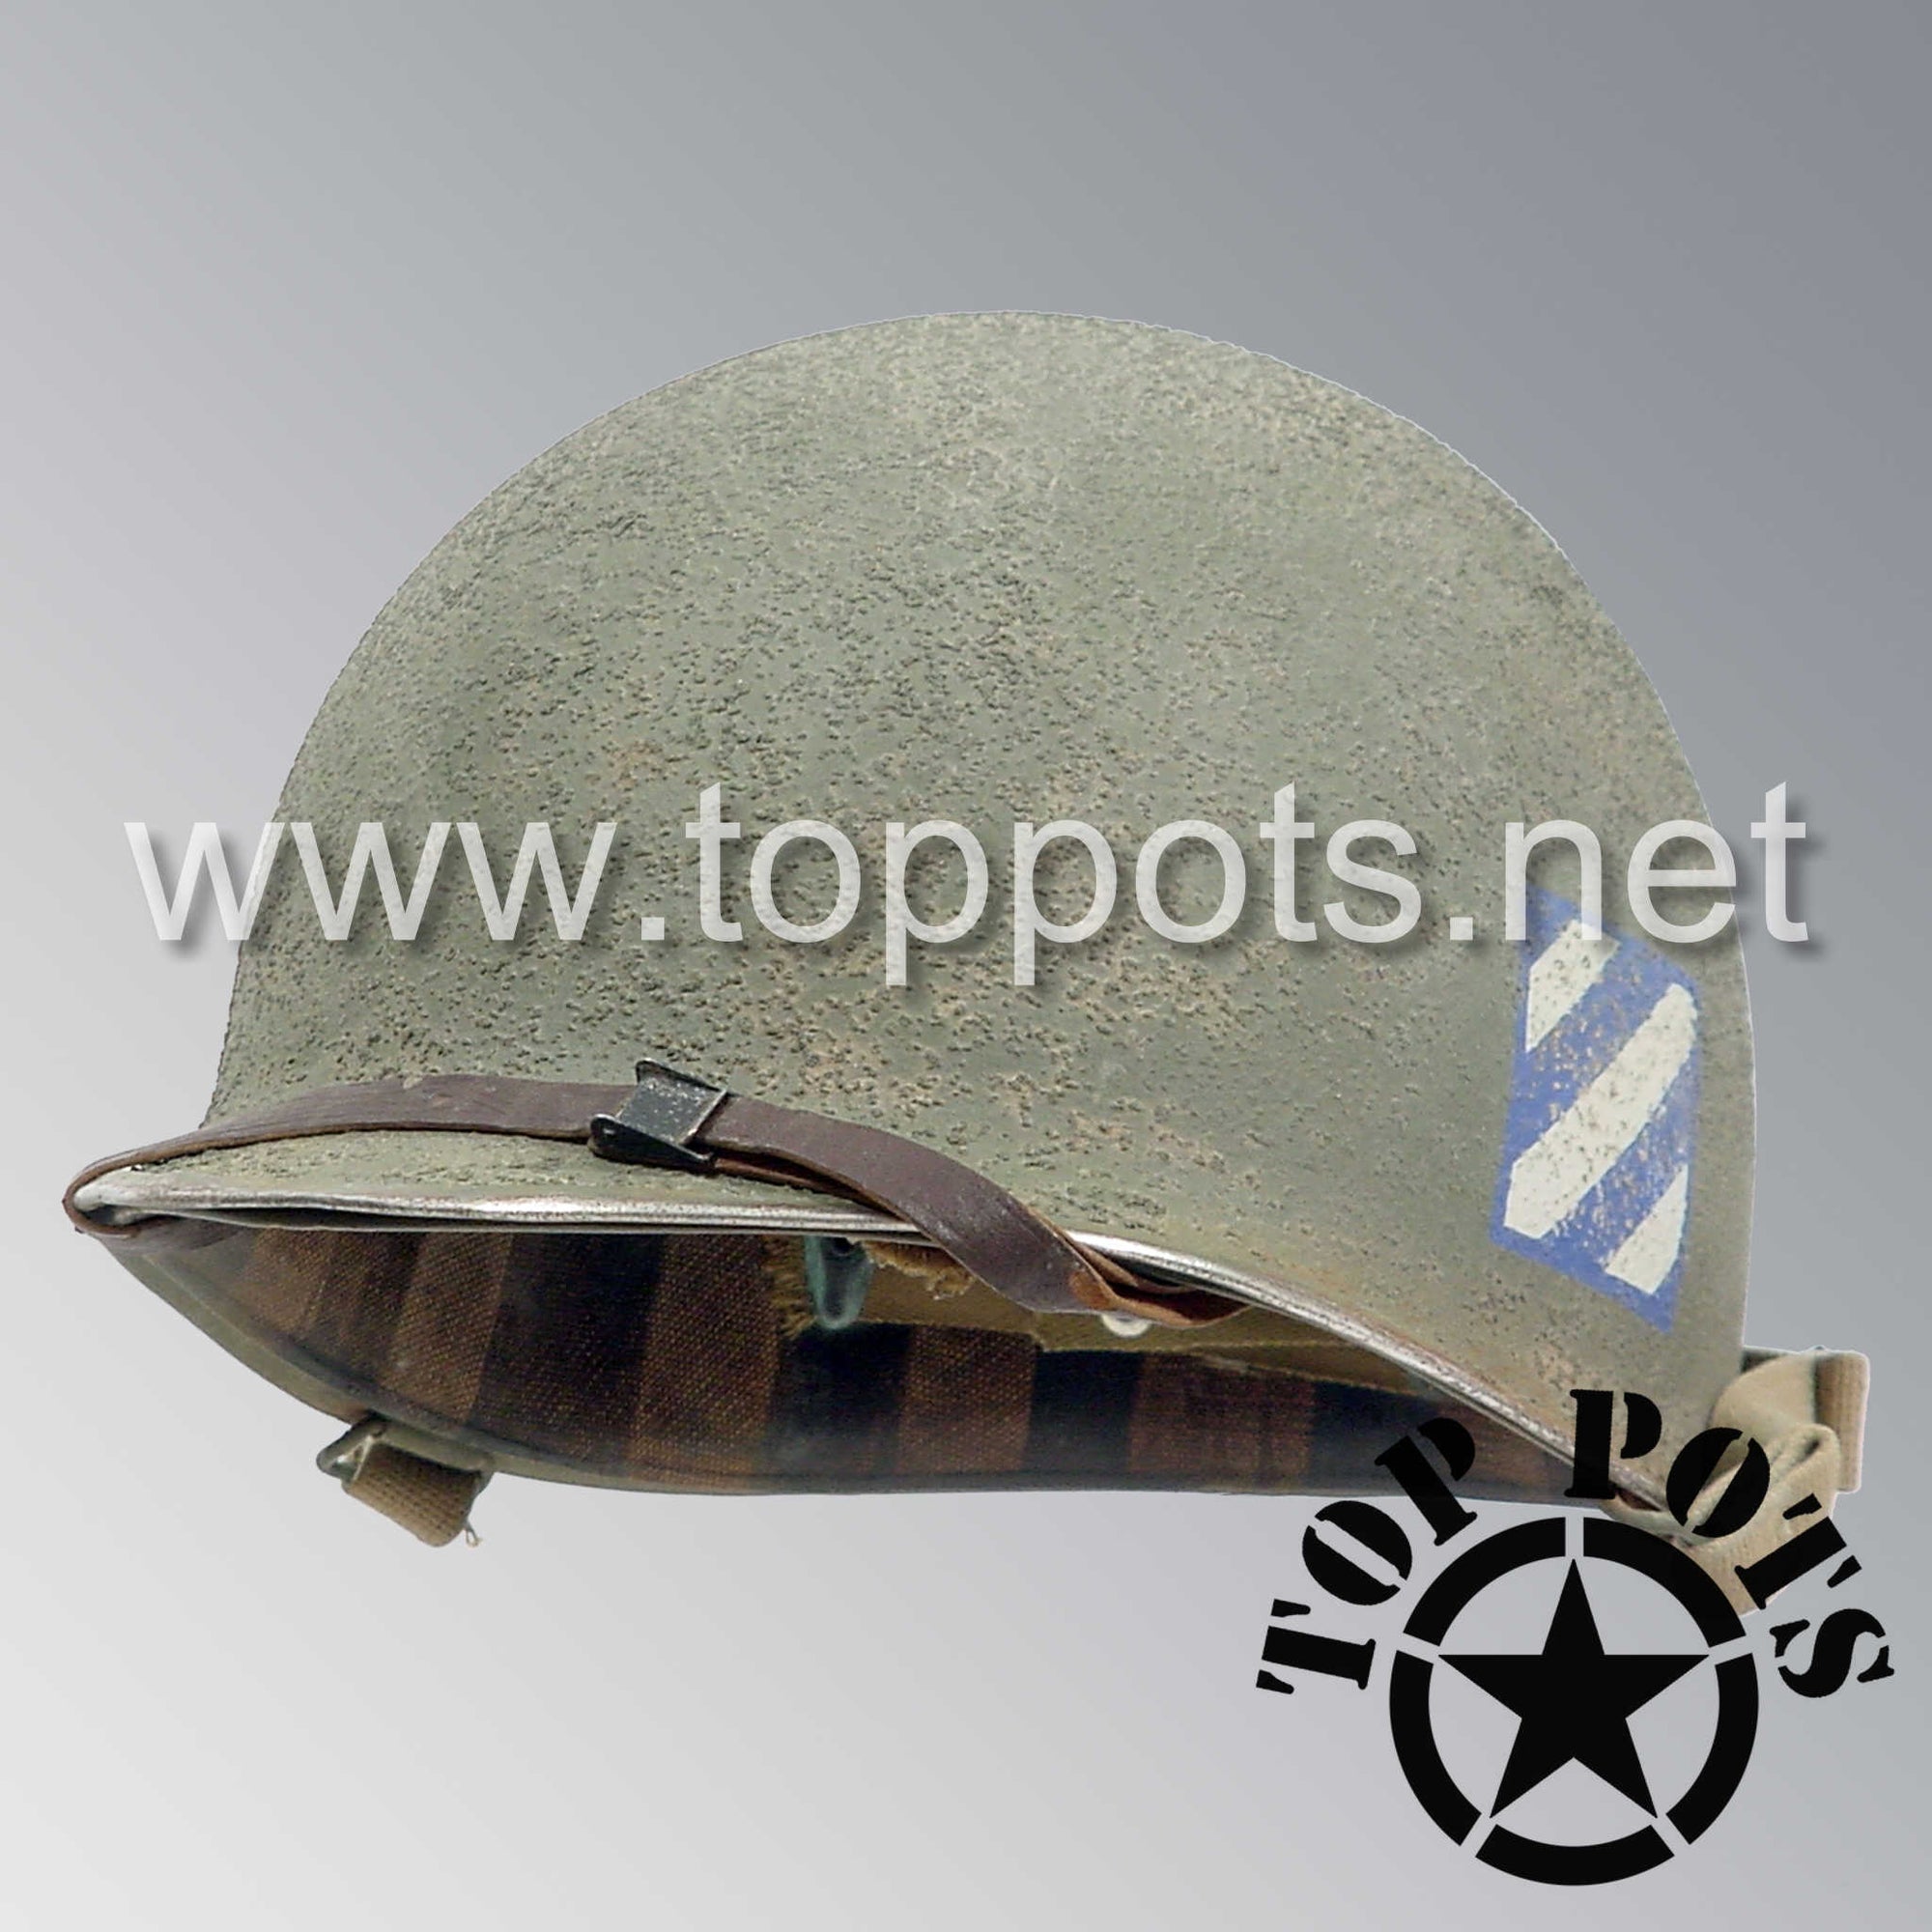 WWII US Army Aged Original M1 Infantry Helmet Swivel Bale Shell and Liner with 3rd Infantry Division Emblem